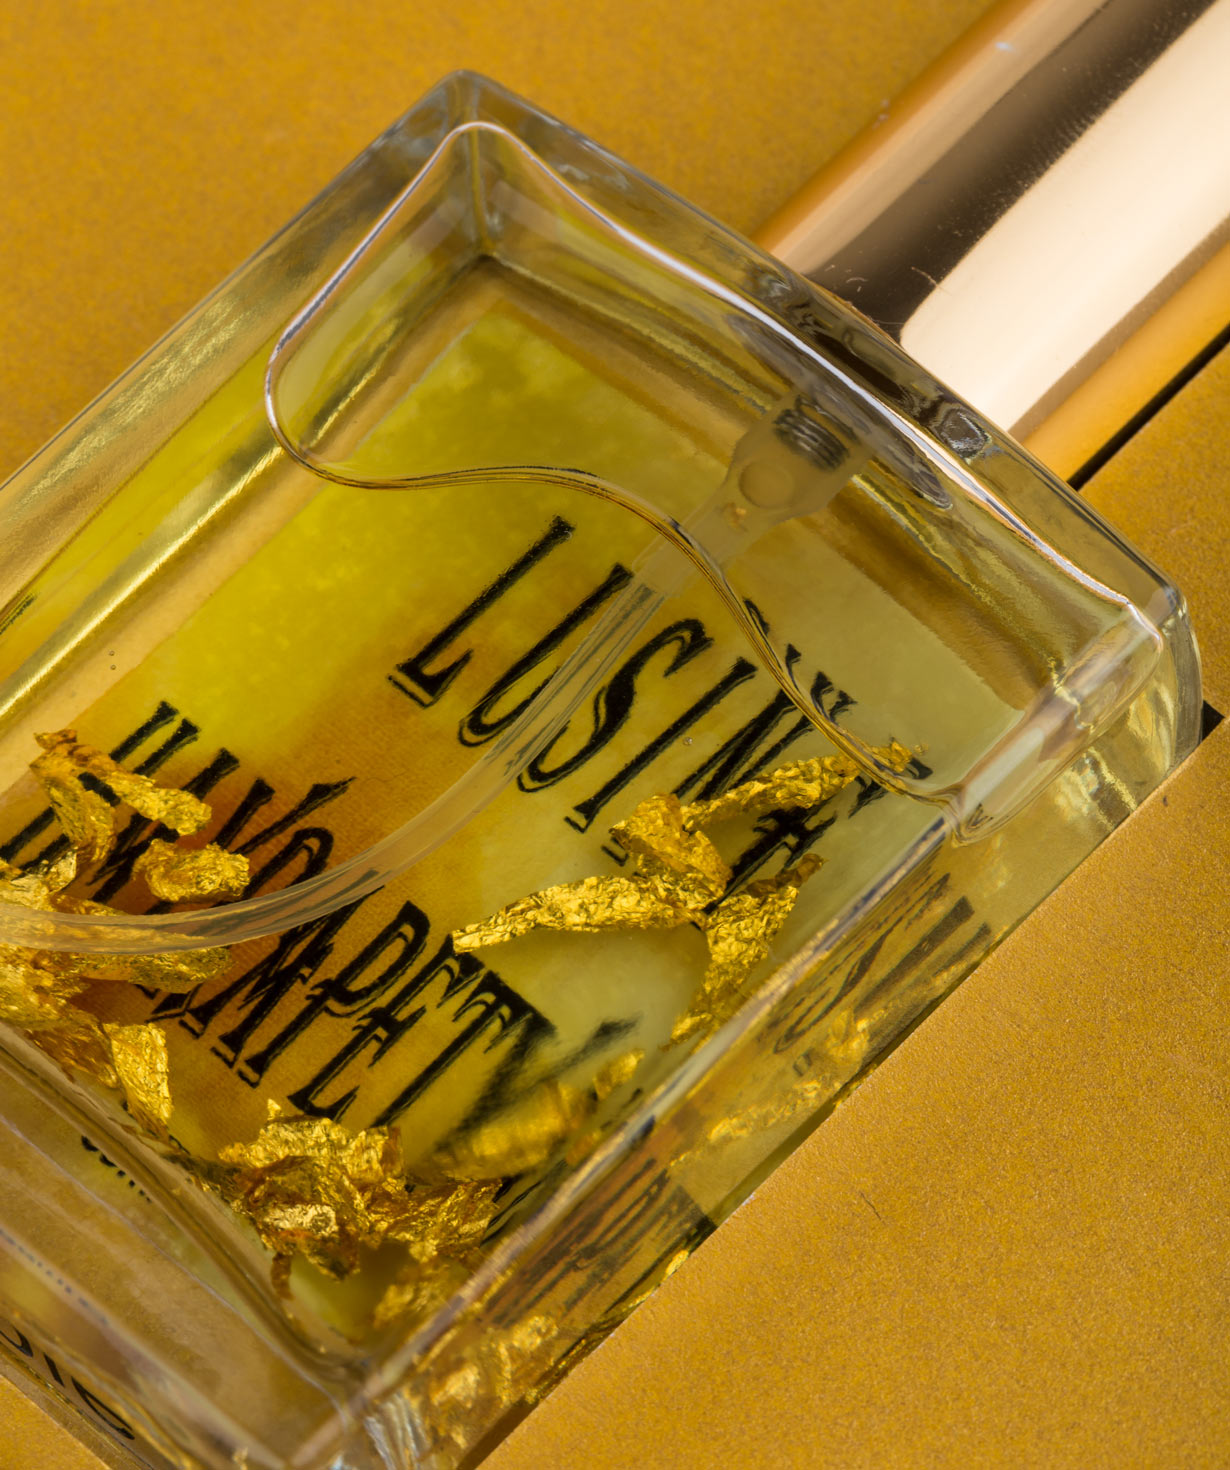 Perfume `Lusin parfume` with your name / surname №3